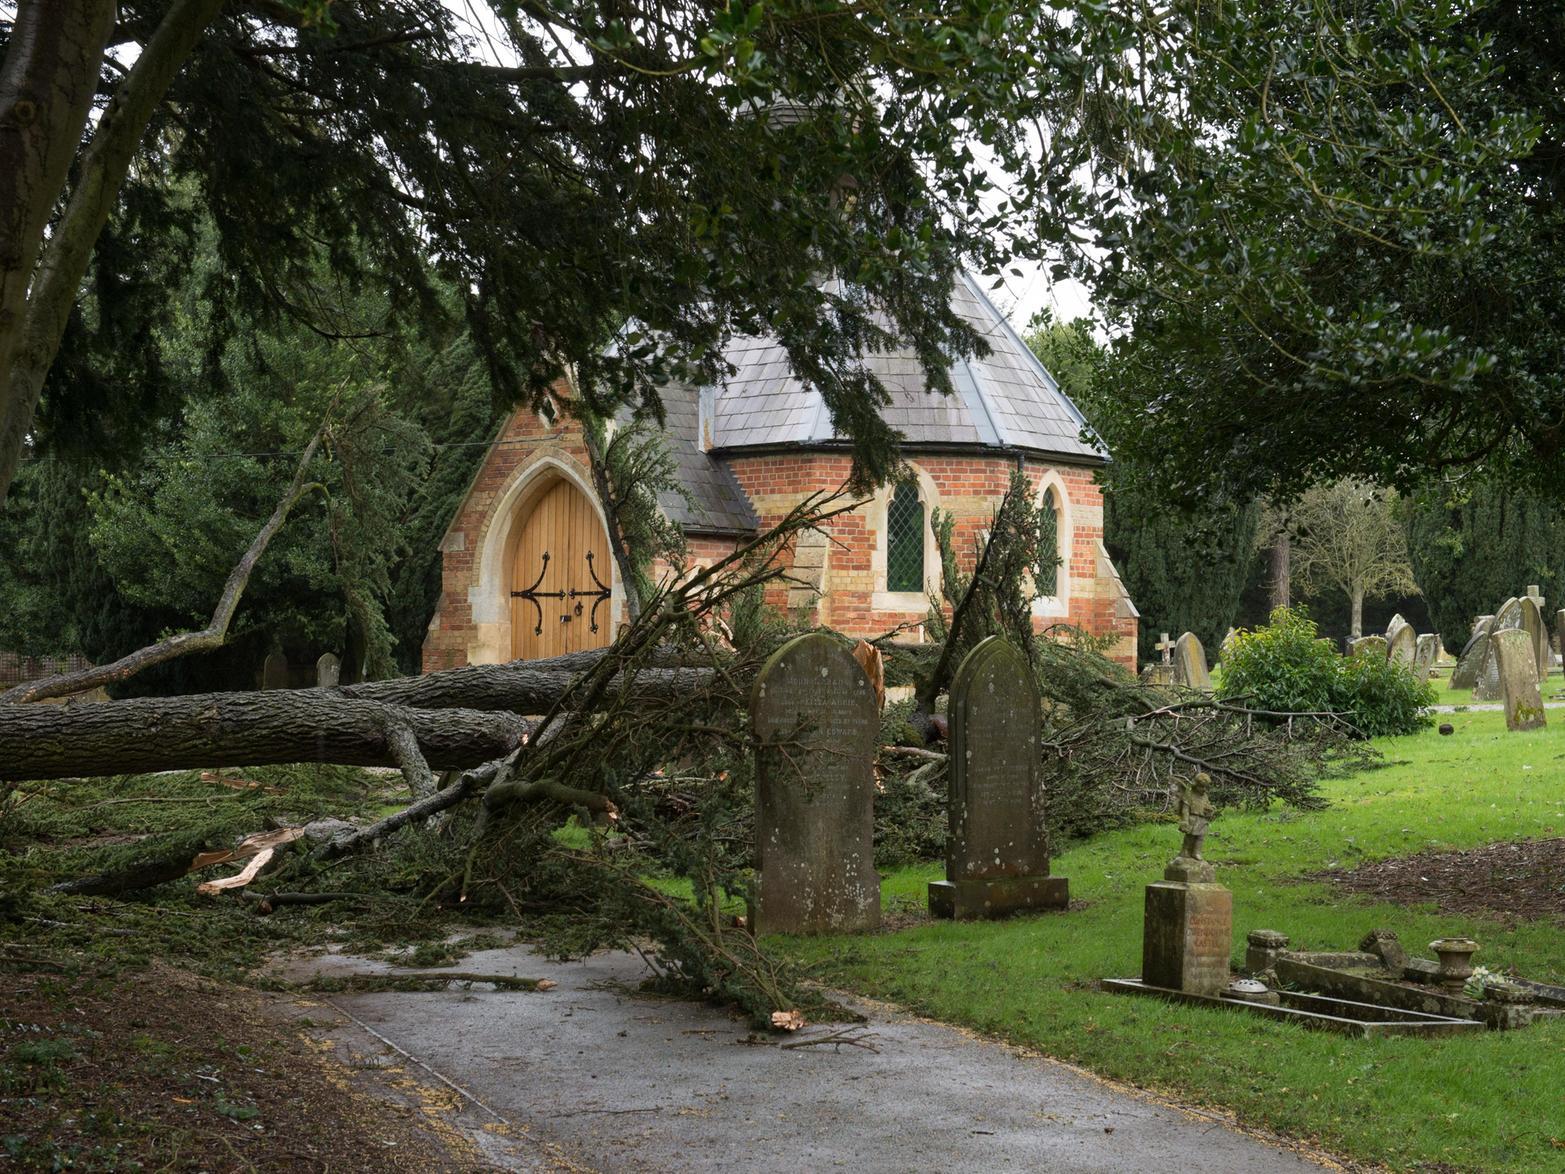 Buckingham cemetery was quite badly impacted by Storm Ciara